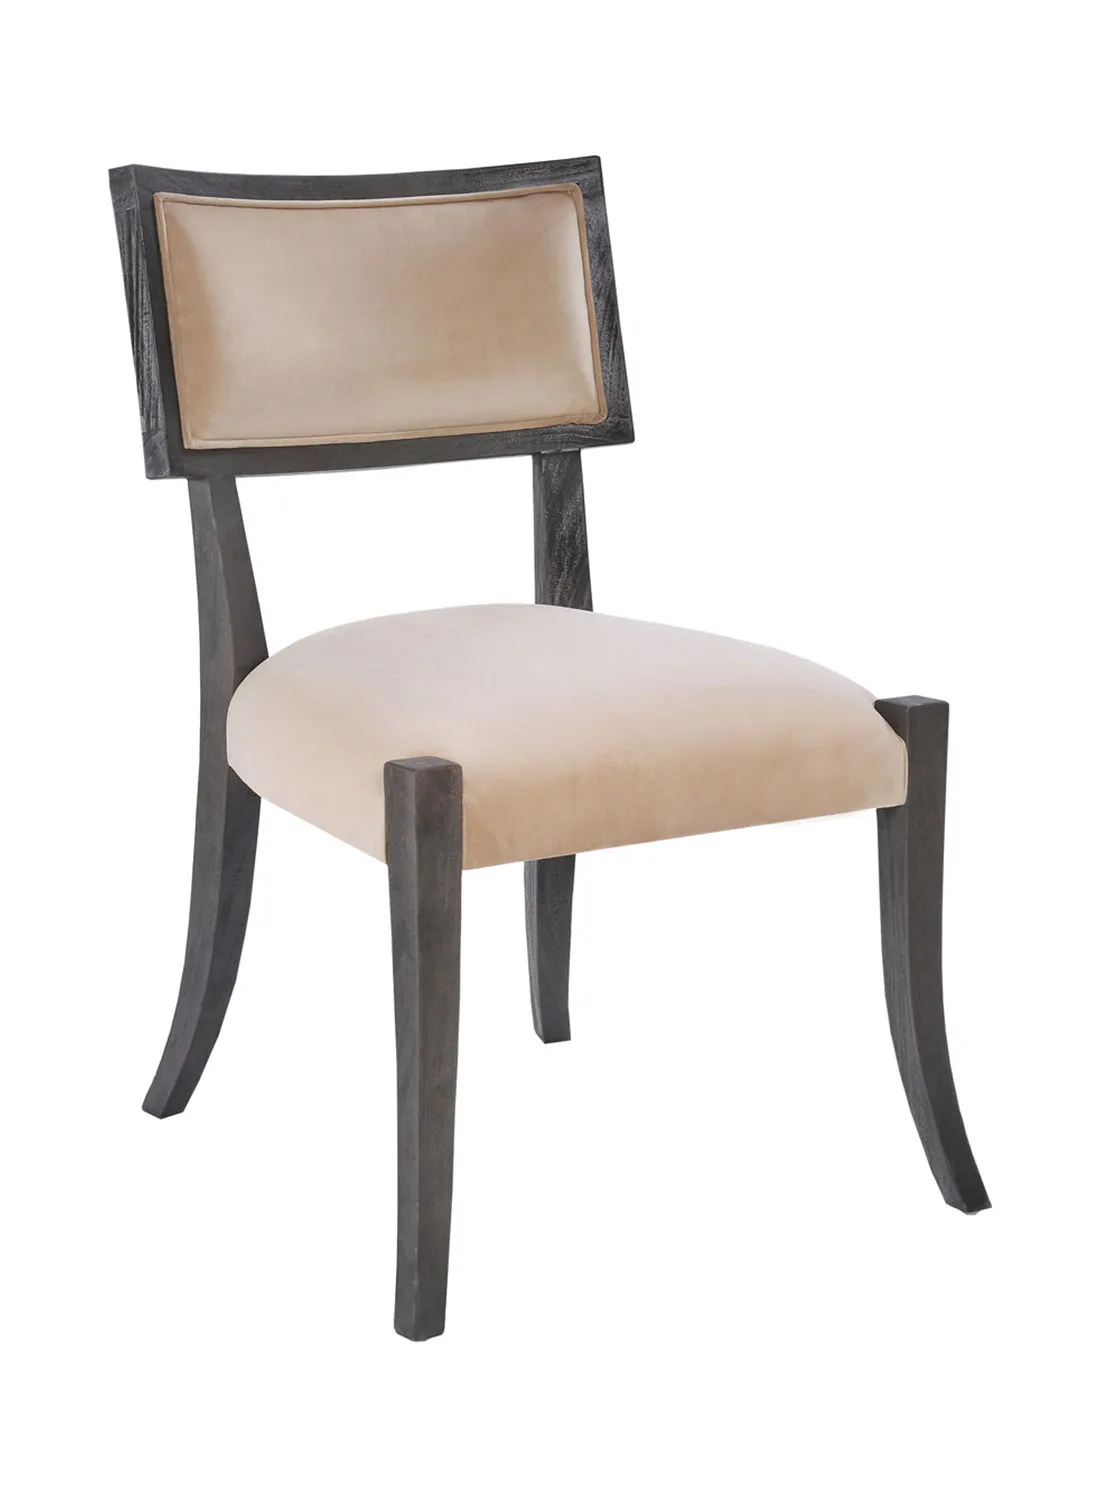 ebb & flow Dining Chair Luxurious - In Oak/Pink Wooden Chair Size 59.5 X 62 X 88